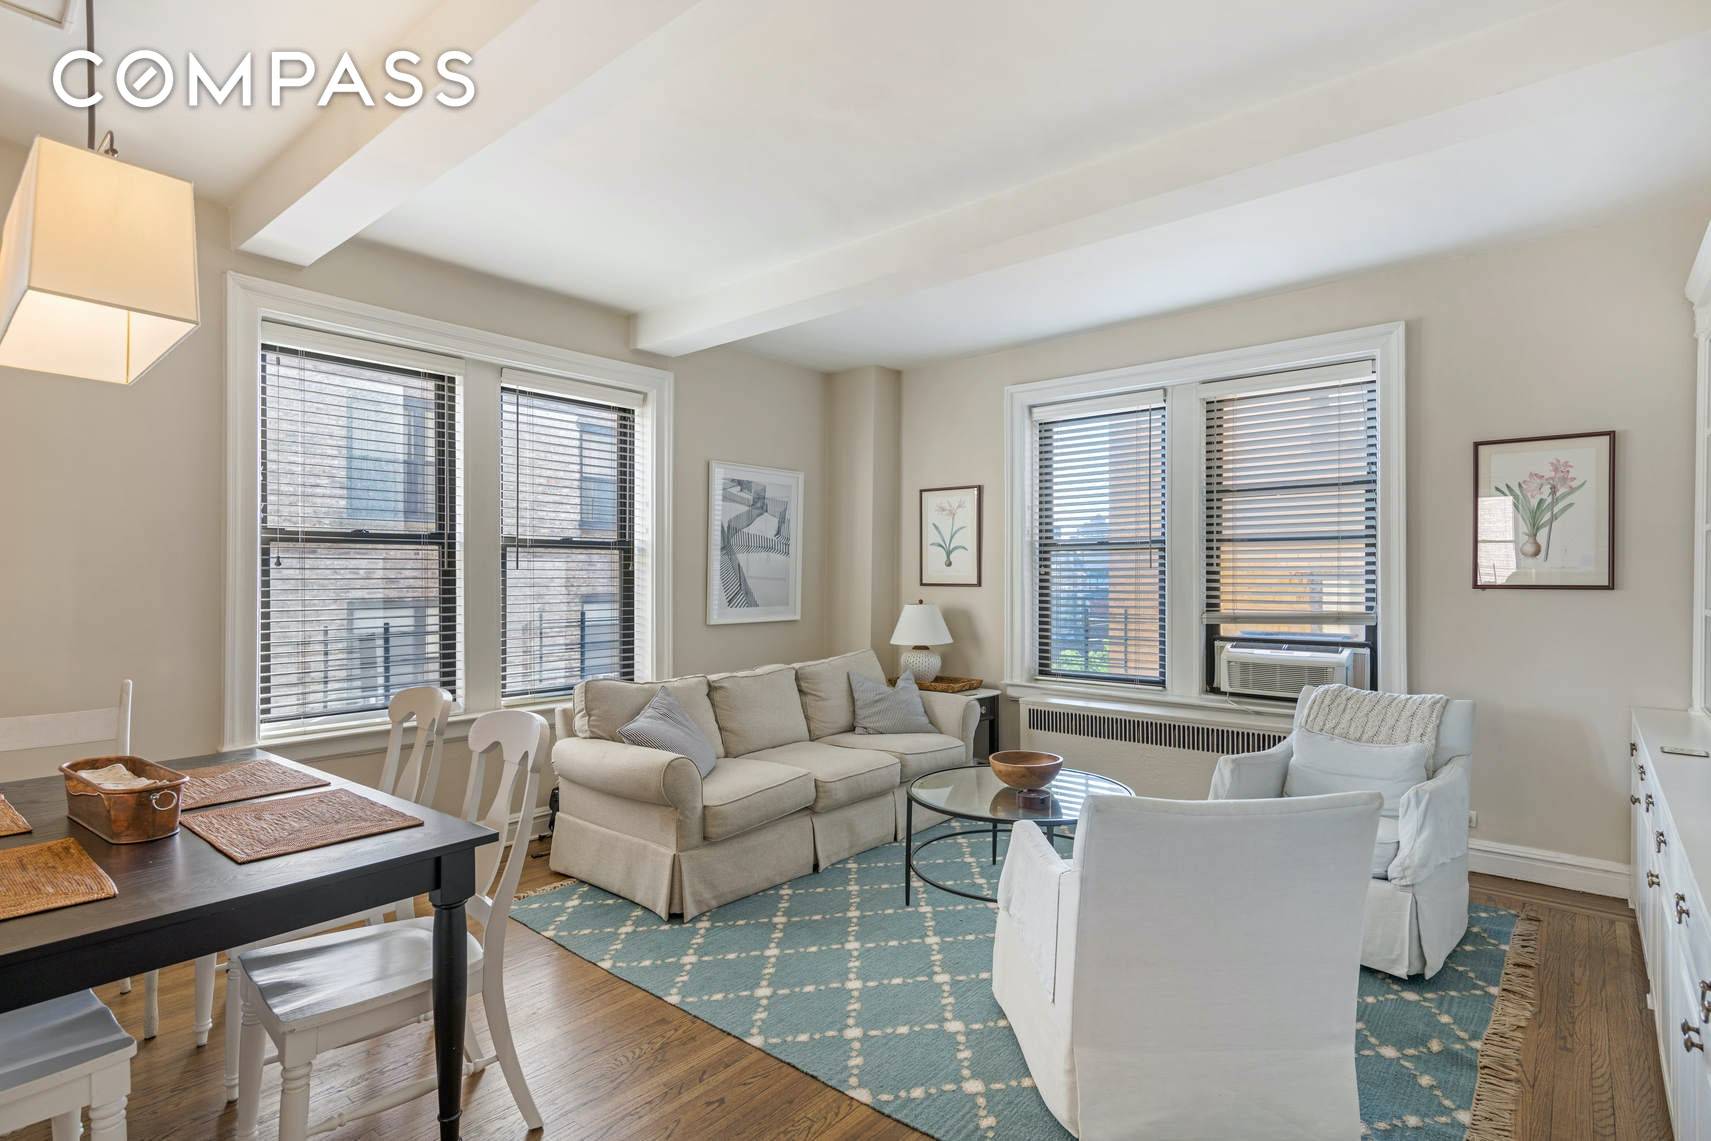 Apartment 6A at 36 W 84th St is a gorgeous 2 bedroom, 1 bath home located just off of Central Park.